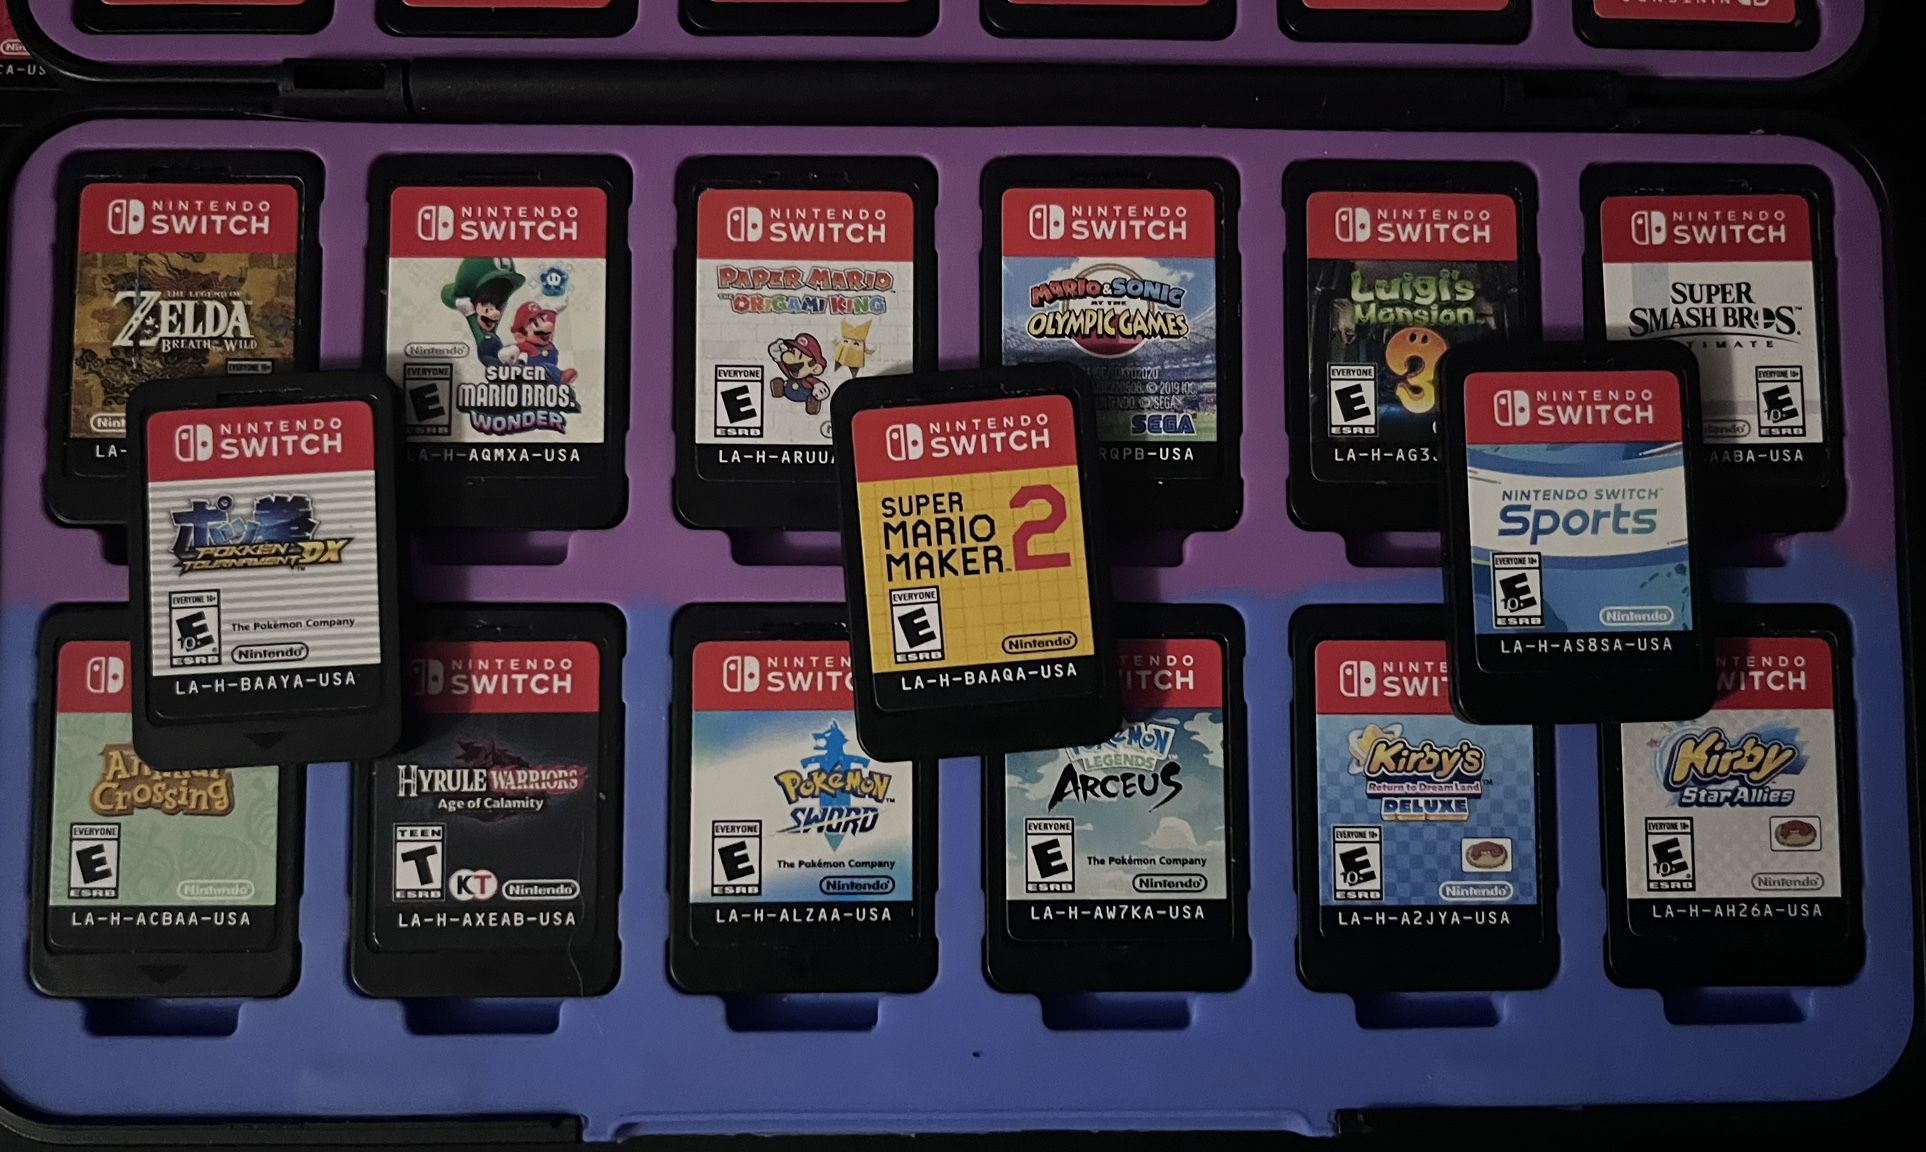 Nintendo Switch Video games $40 Each No Cases